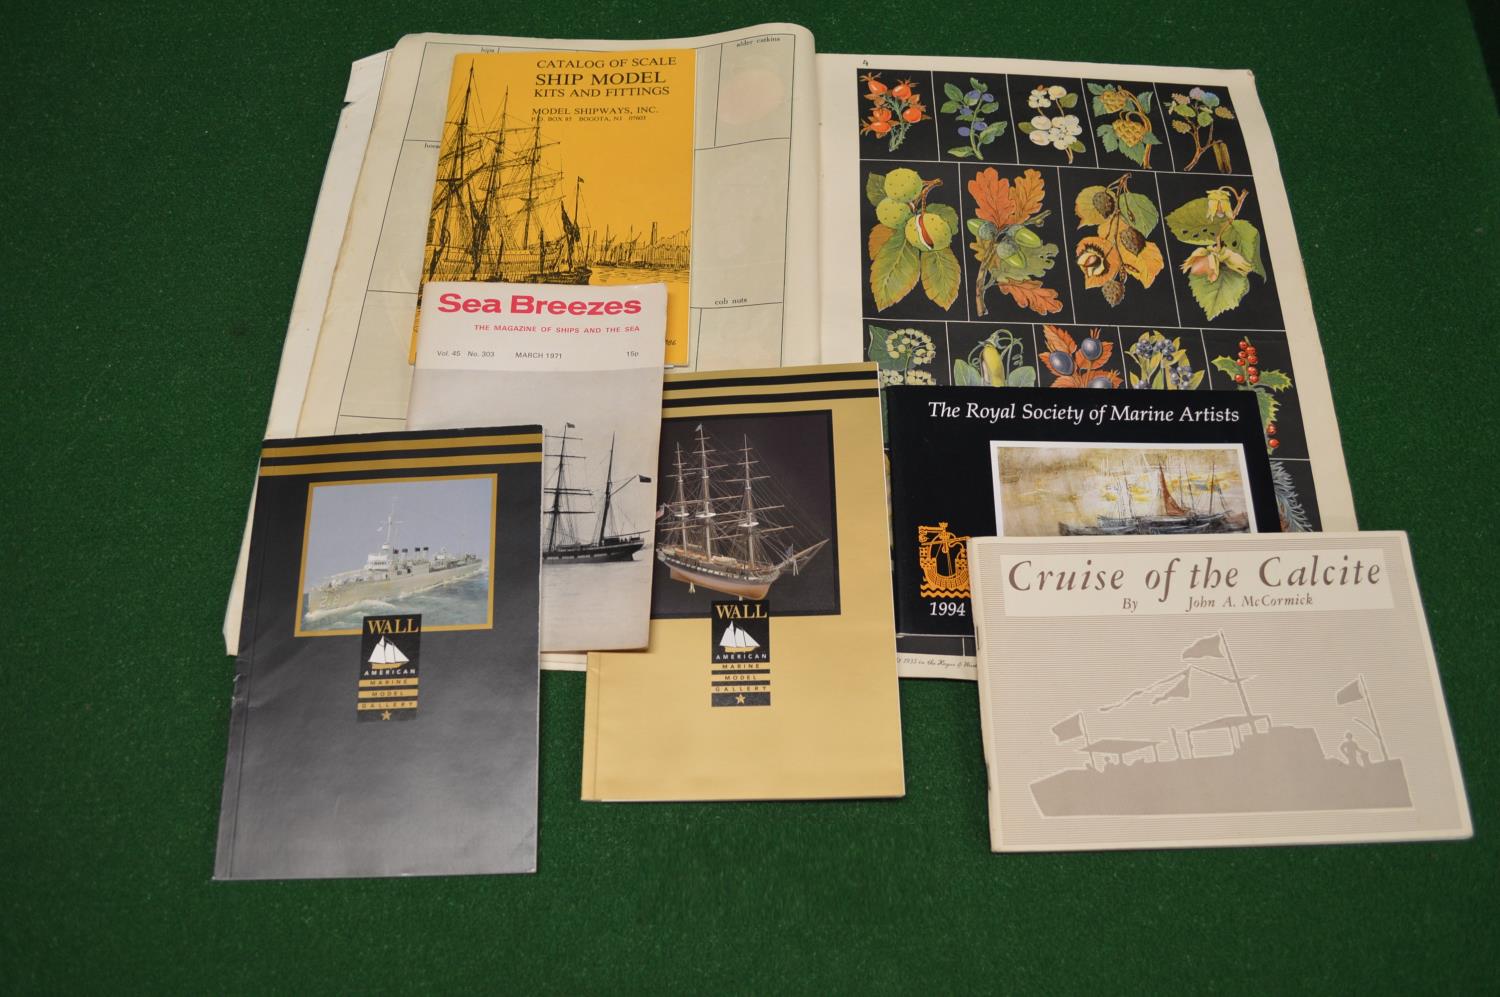 Large box full of model and model railway ephemera, leaflets, booklets and catalogues from the - Image 3 of 3